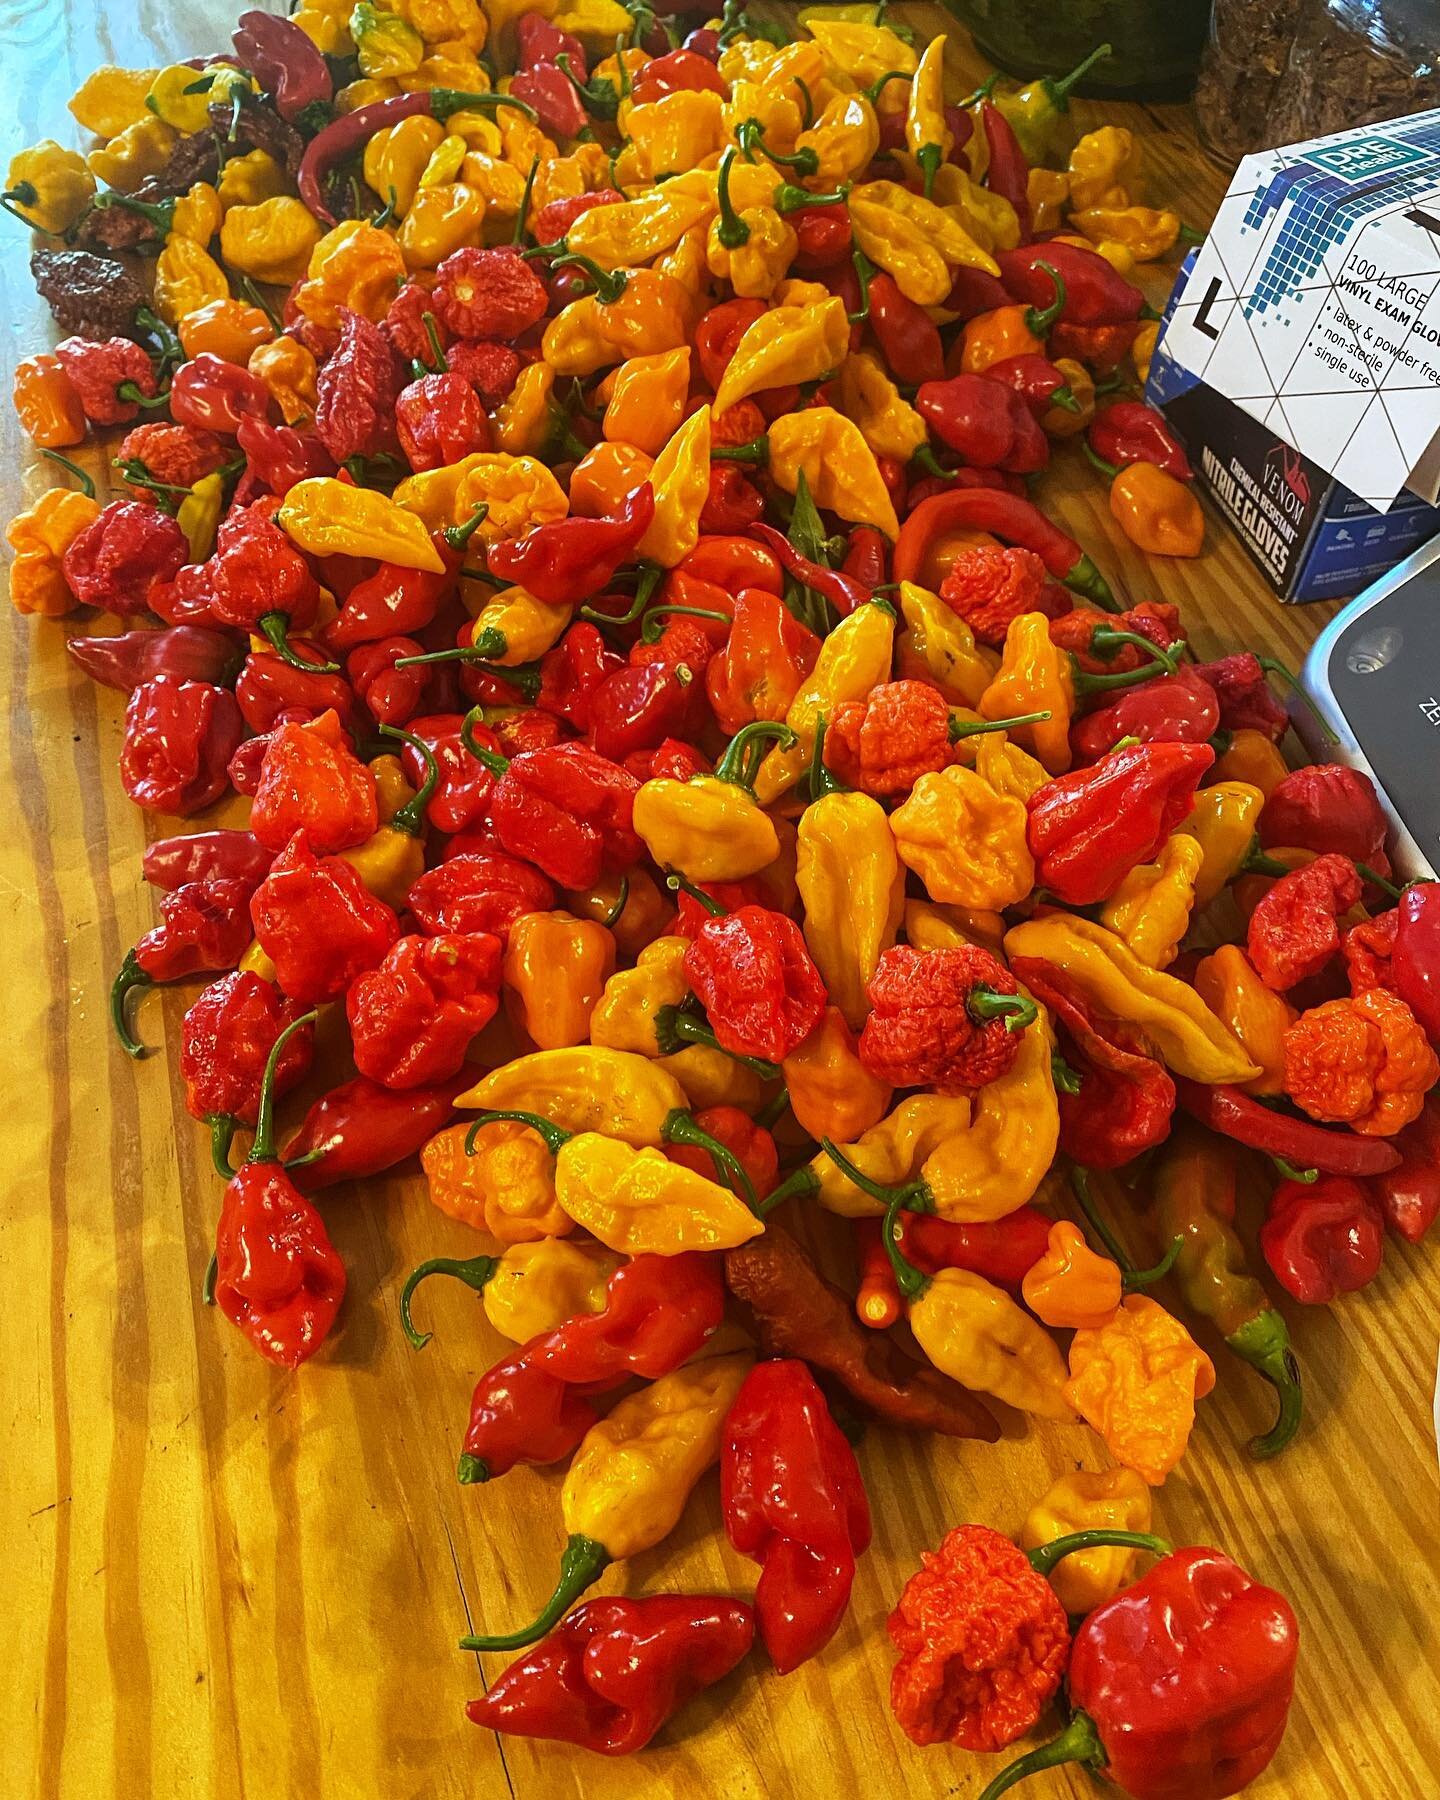 What do we do with Peppers?!?
We make SAUCE. 

It&rsquo;s taken all dang year to get to this point but it&rsquo;s a blast when we finally get here. 

Is your sauce fermented? Grab at @ellwoodsrva @goodfoodsgrocery or any of our local markets. Posting